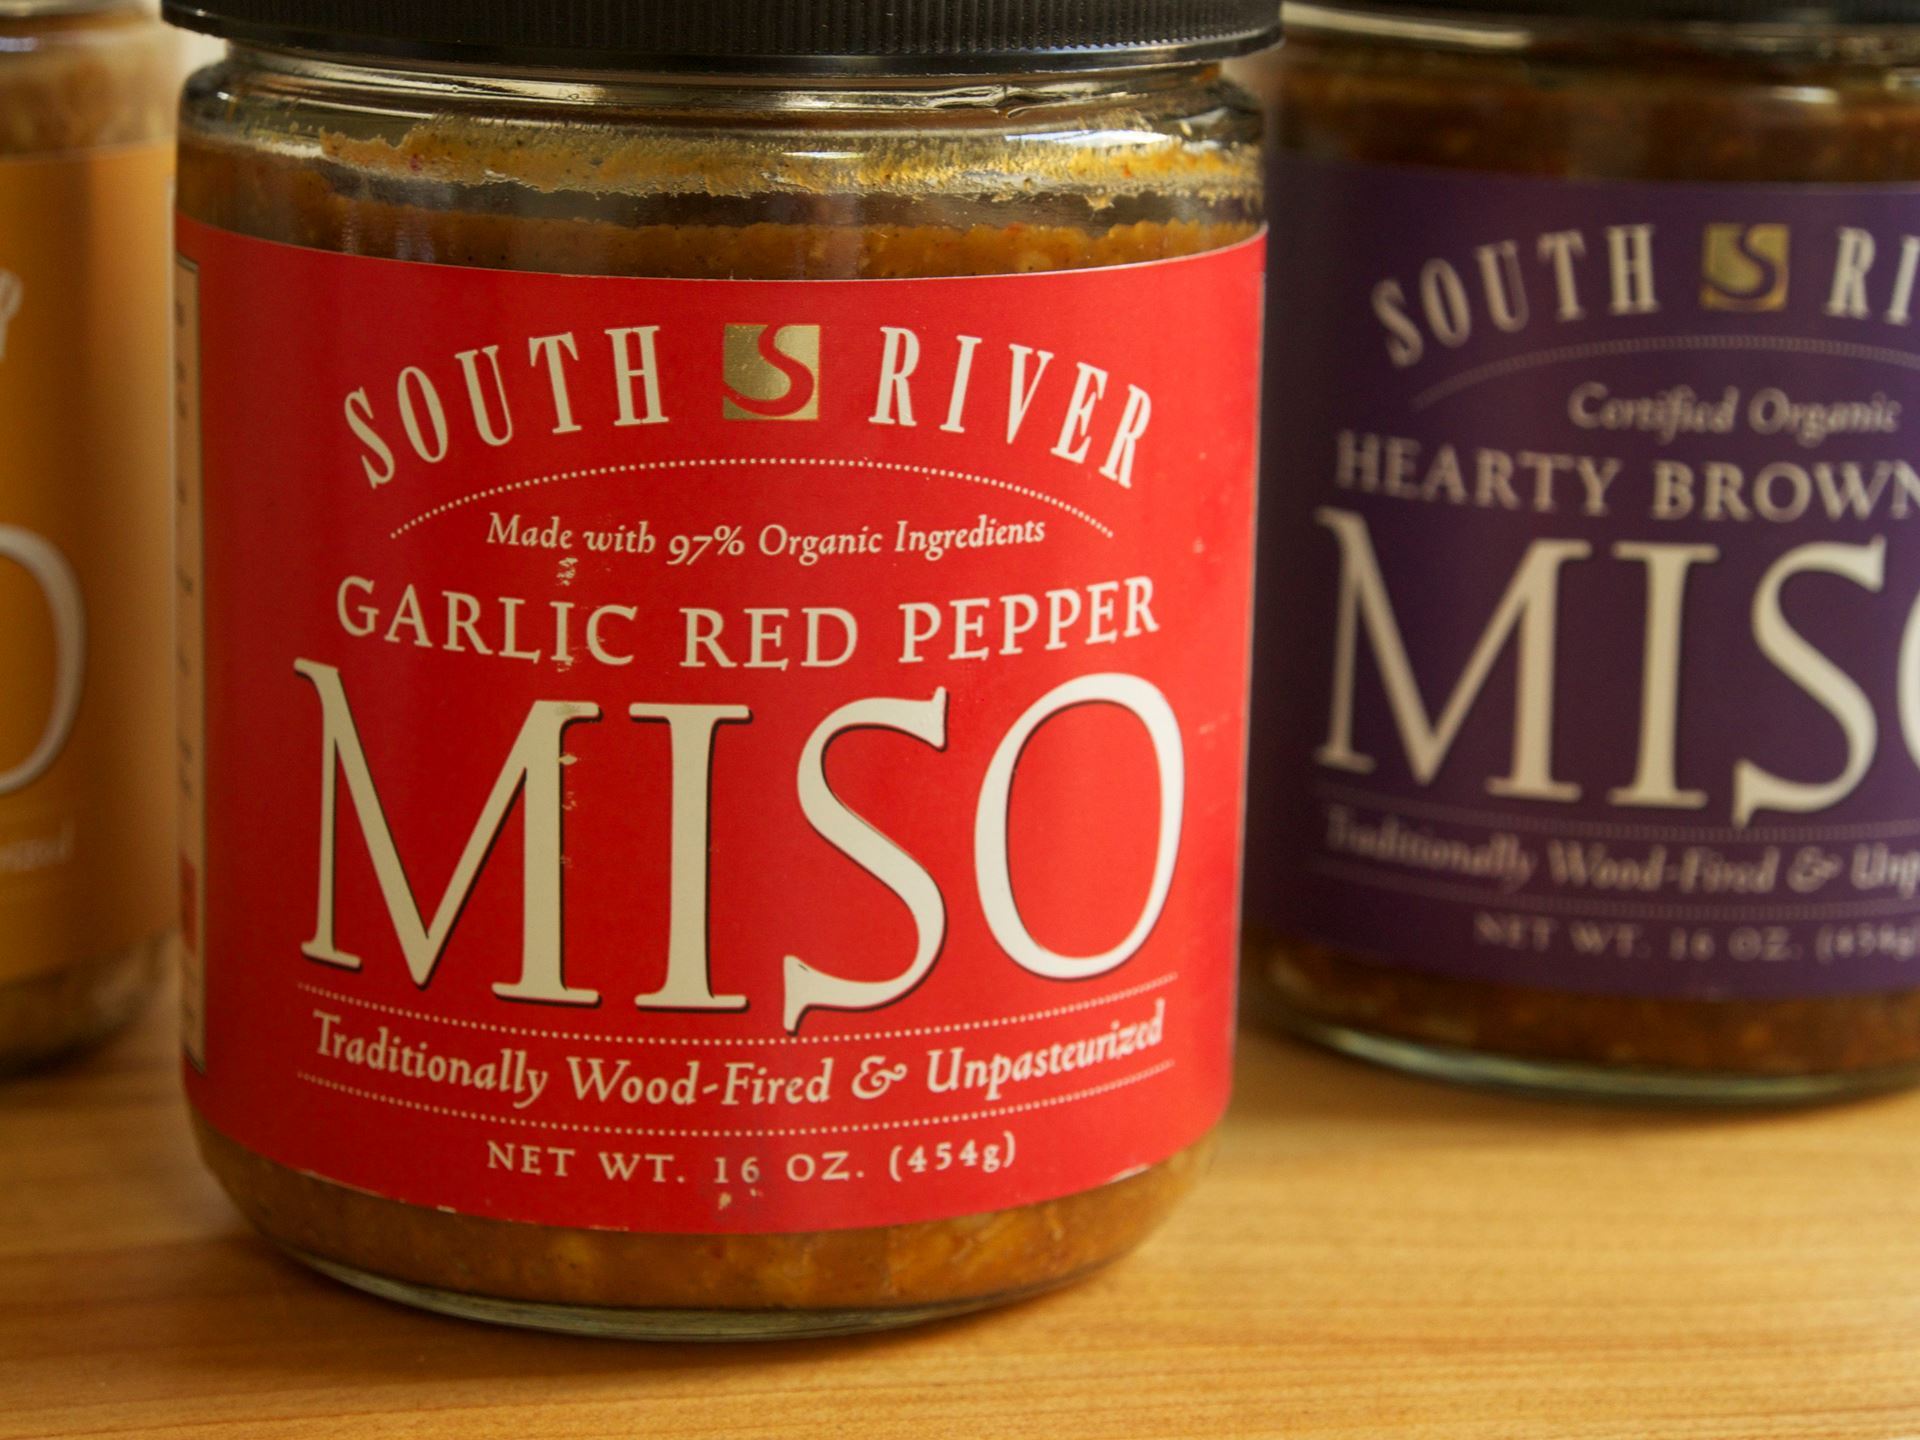 Picture of South River Garlic Red Pepper Miso